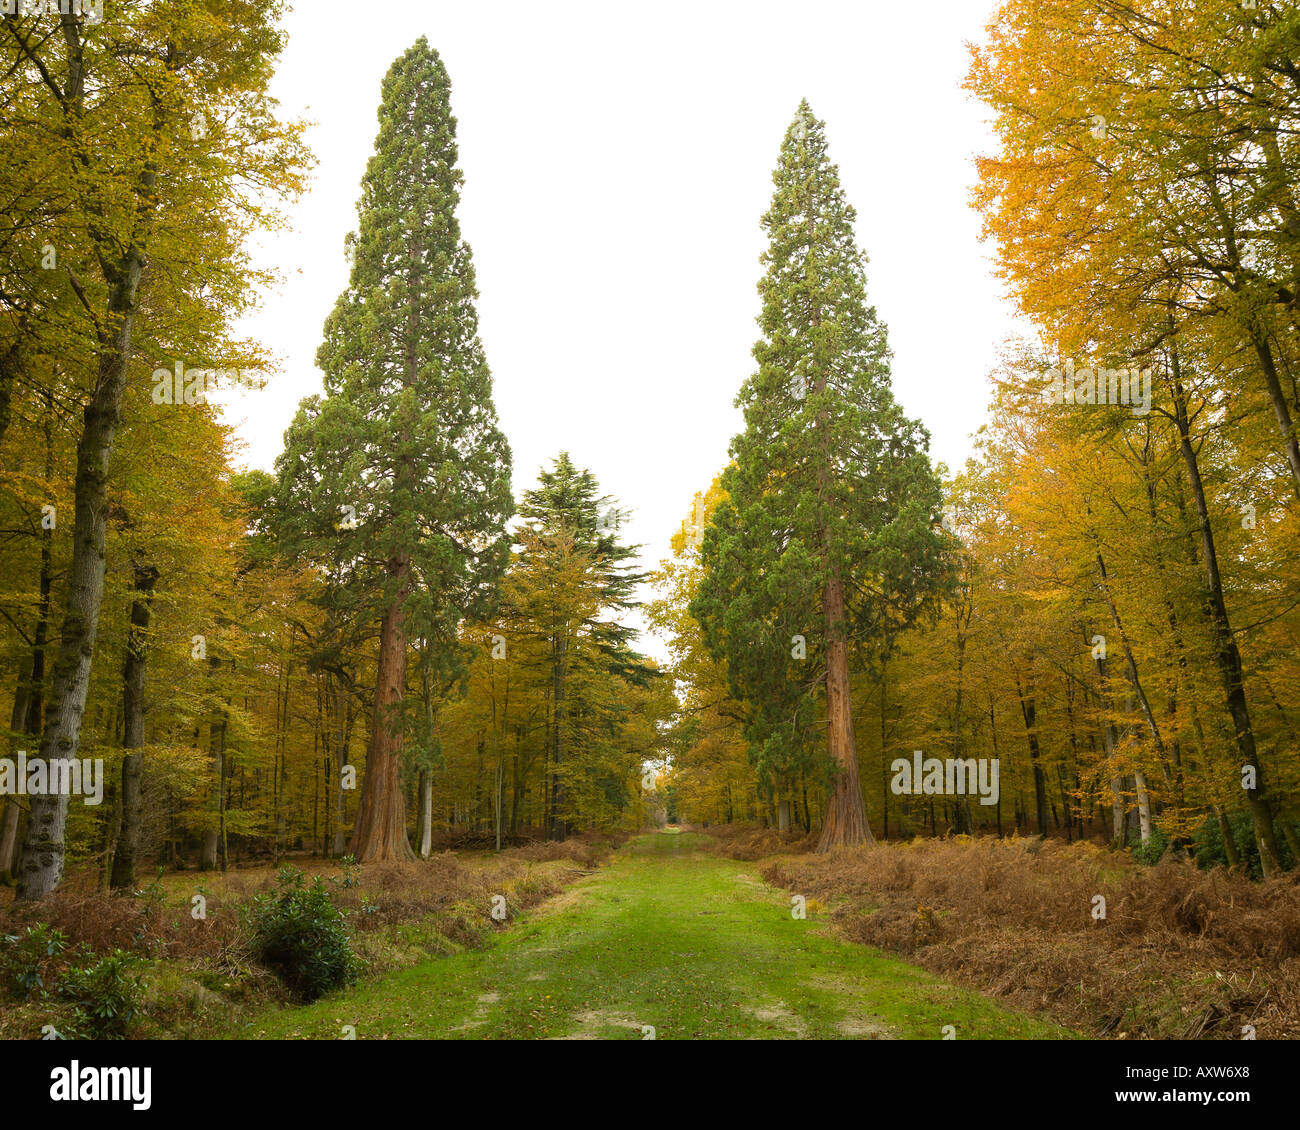 Two Giant Sequoia trees Black Water Arboretum New Forest Hampshire UK Stock Photo